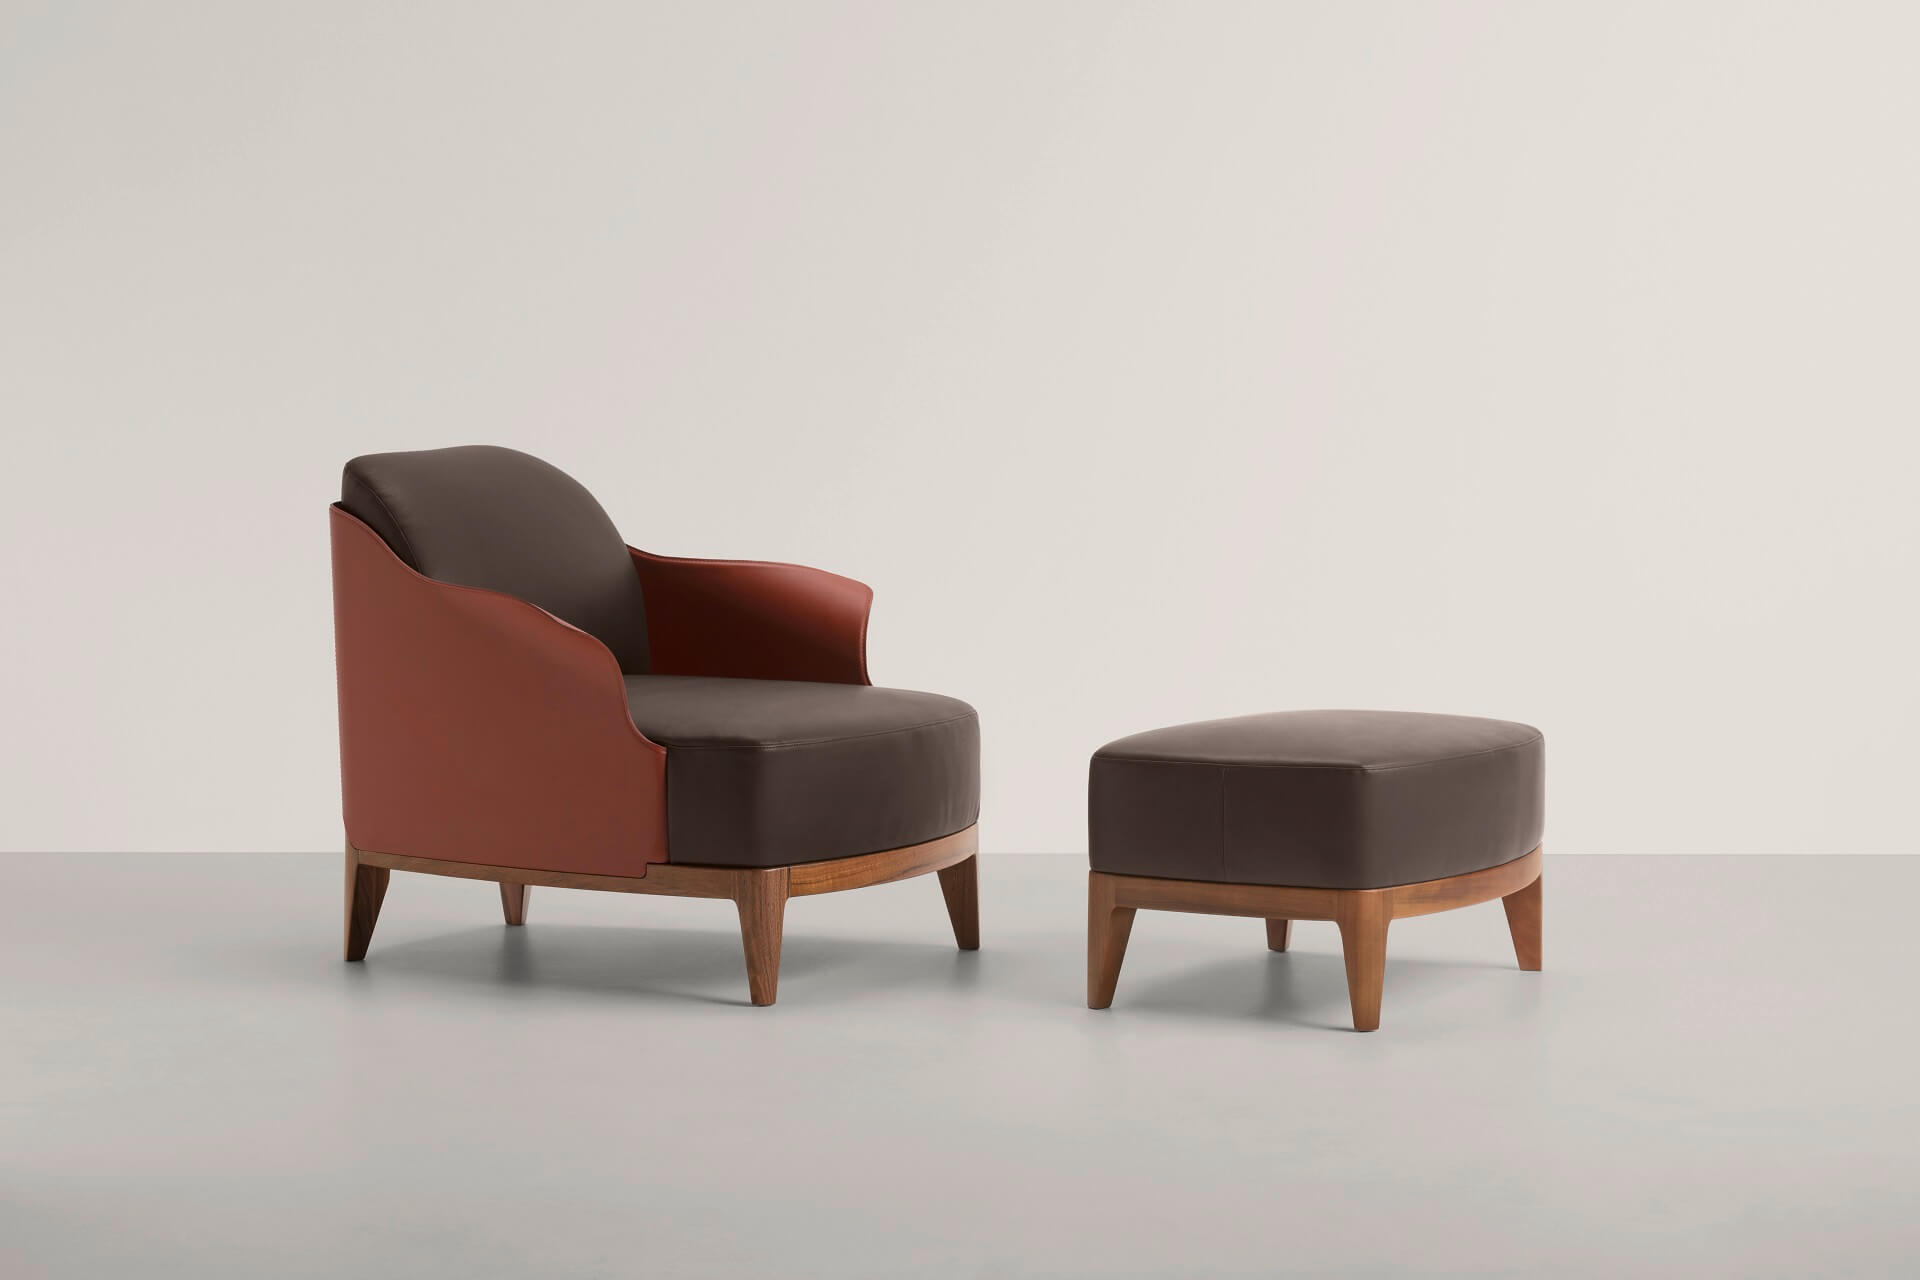 Frag_Cocoon armchair and pouf